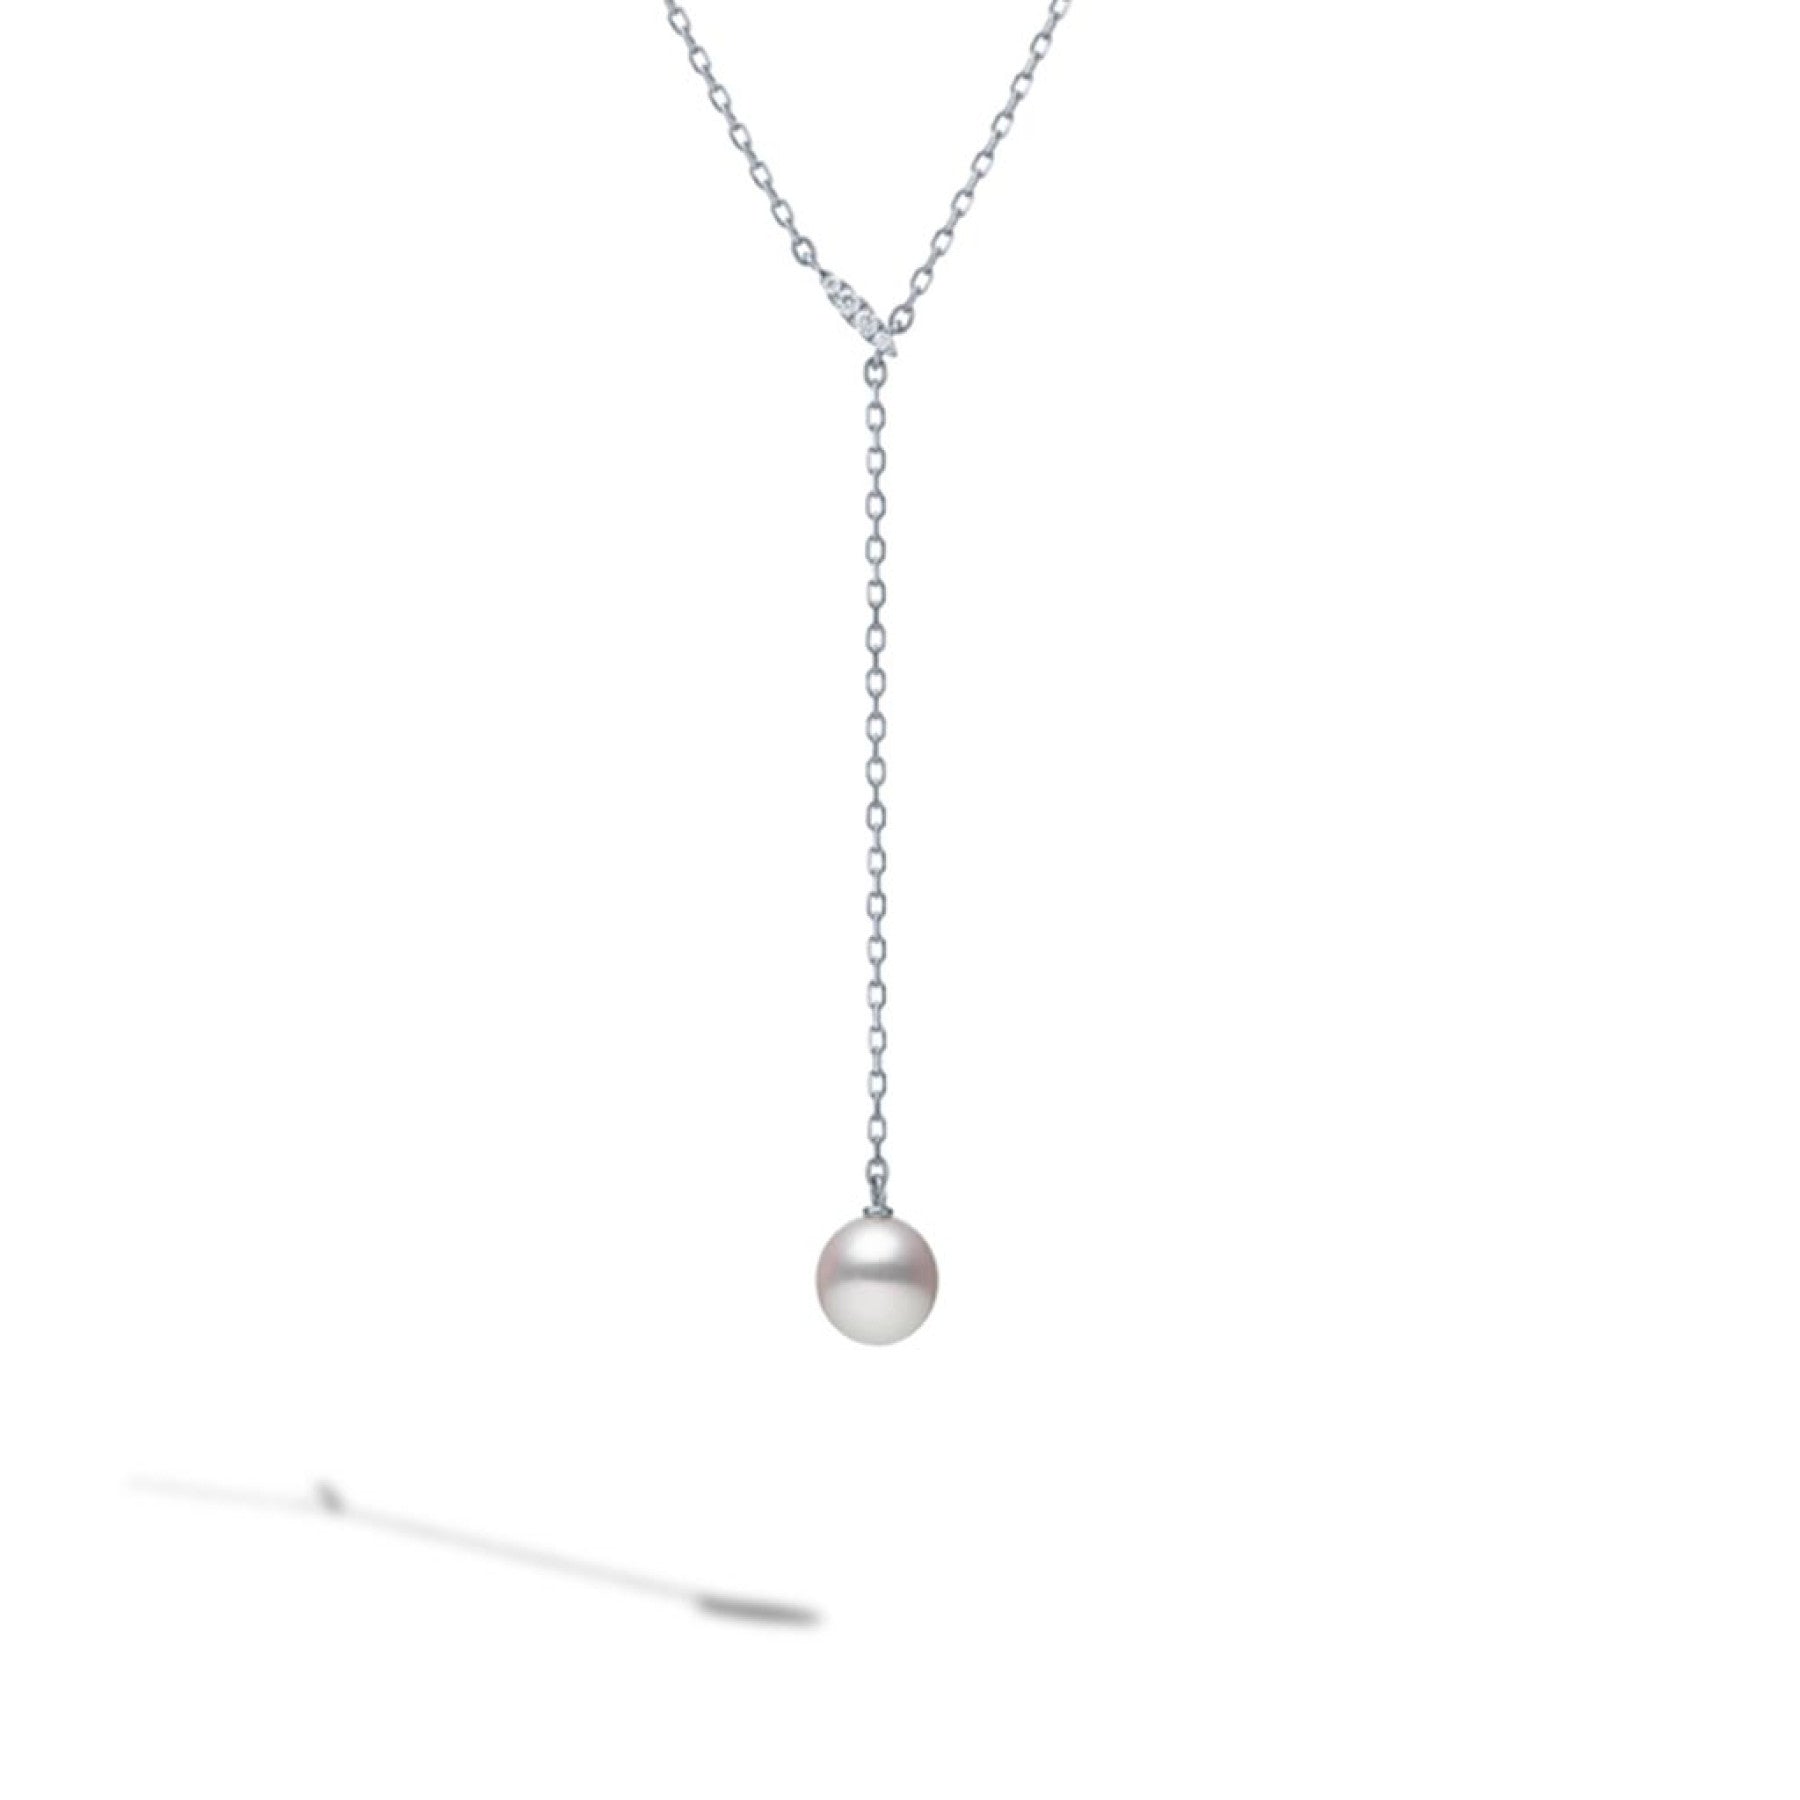 Lariat Necklace with Pearl & Diamonds